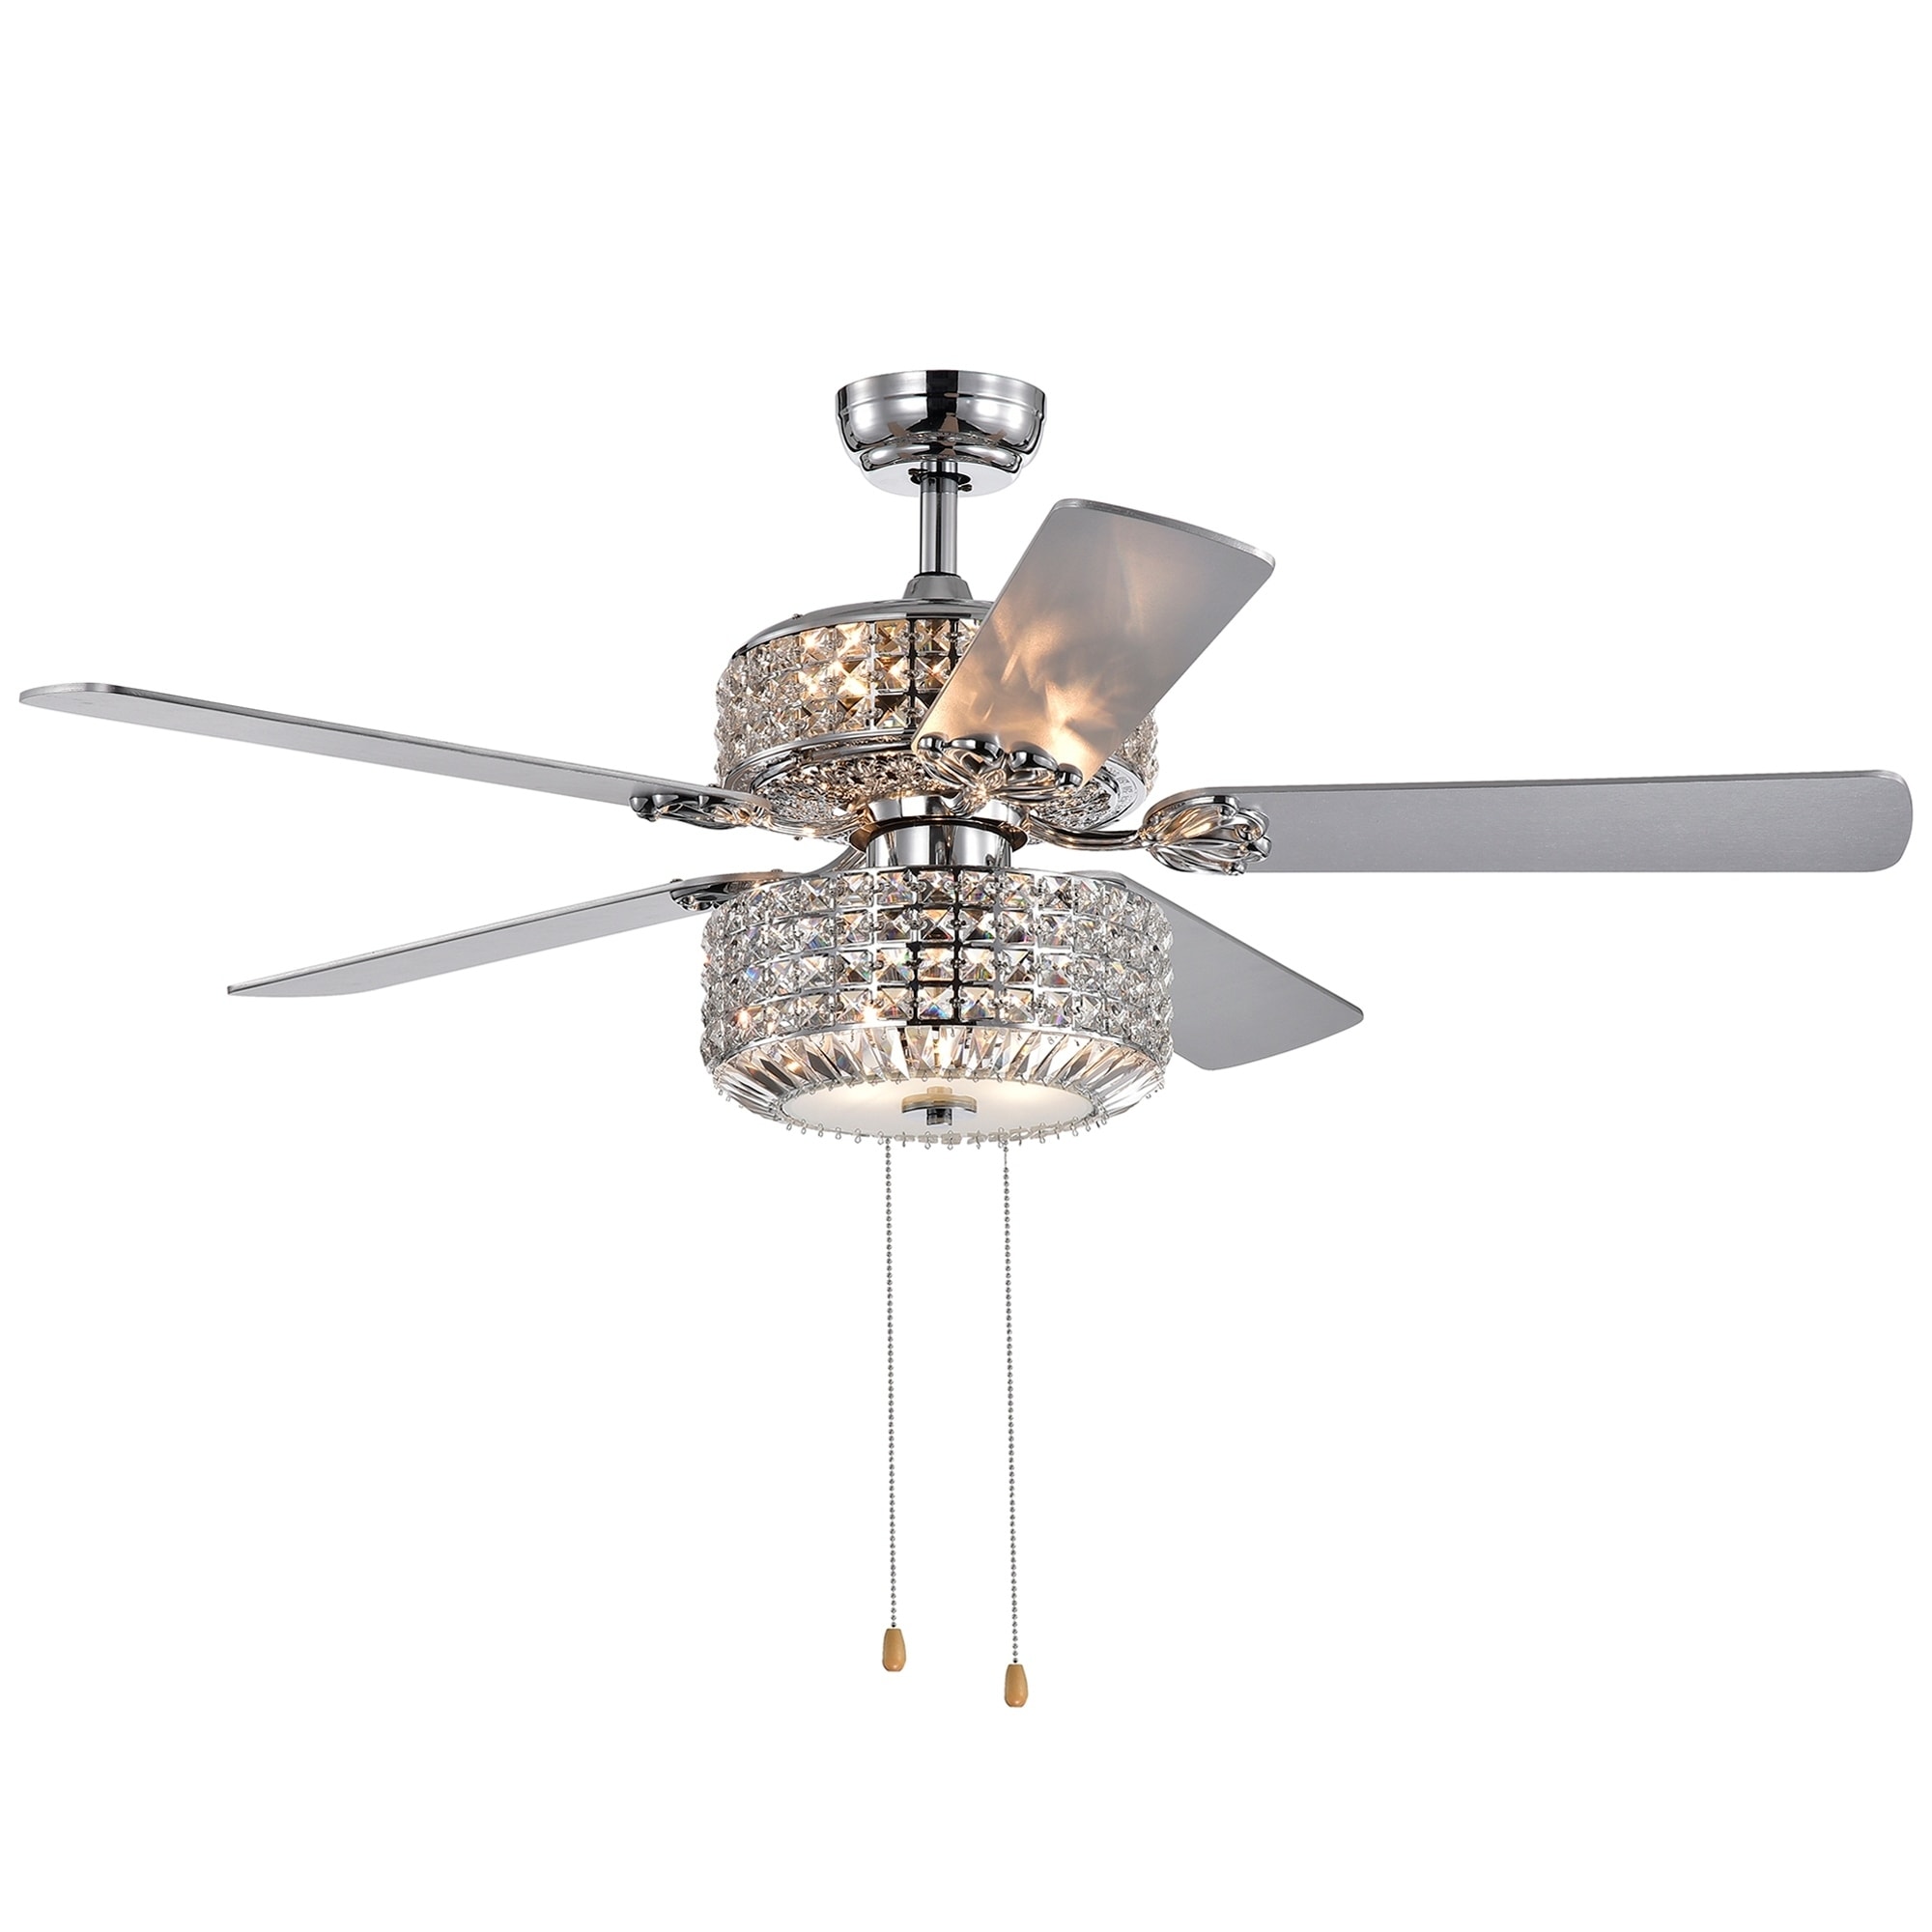 Walter Dual Lamp Chrome 52 Inch Lighted Ceiling Fan W Crystal Shades Optional Remote Incl 2 Color Blade Options